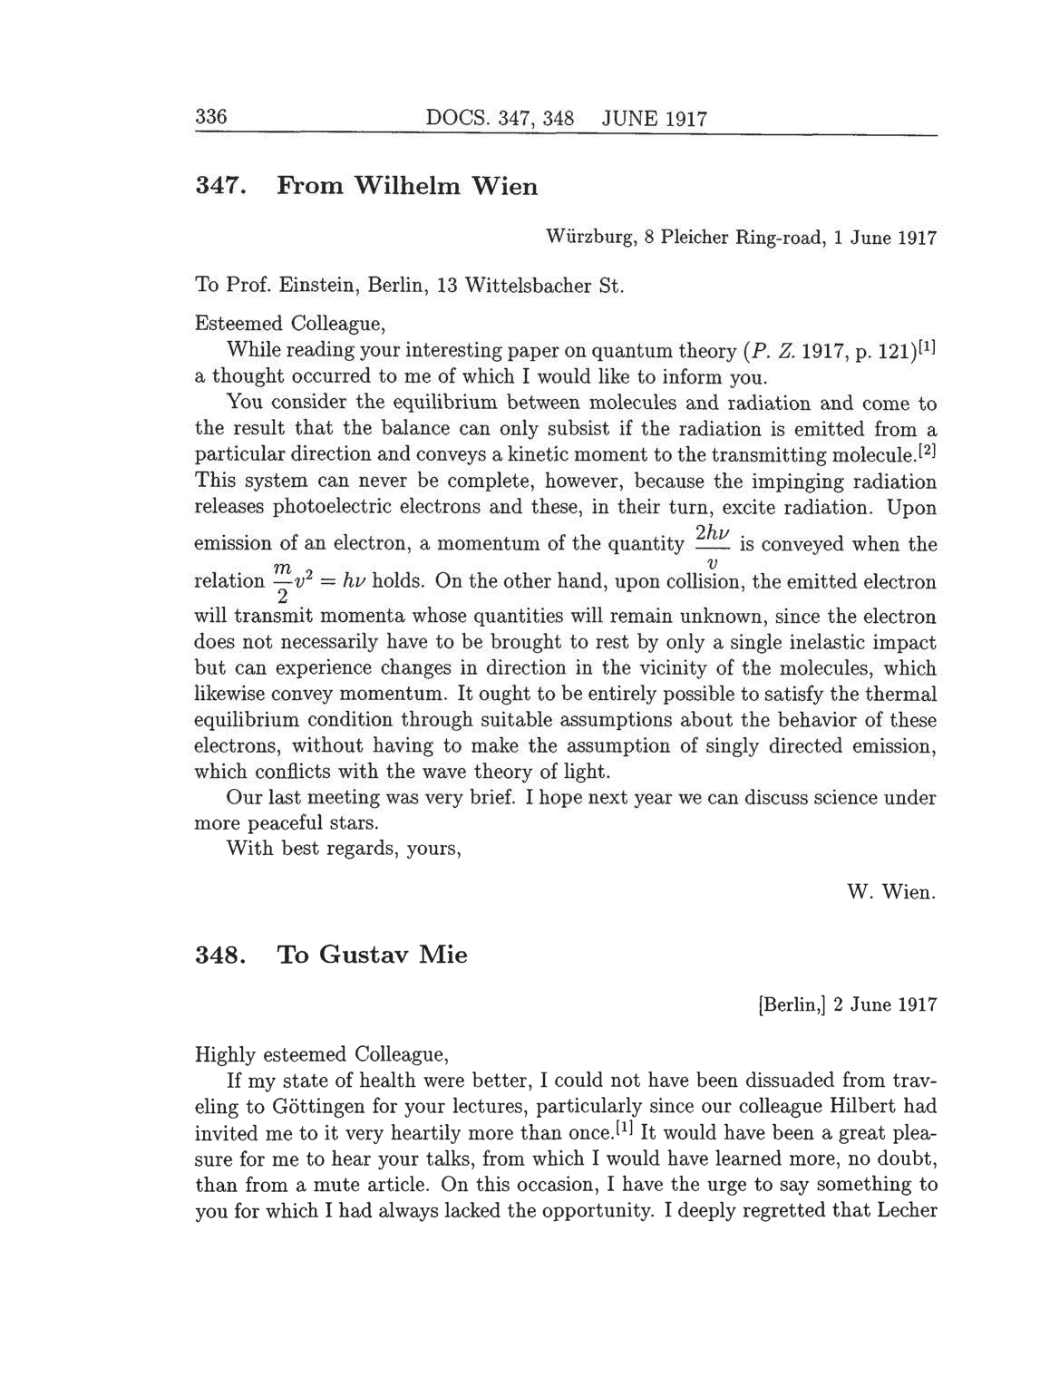 Volume 8: The Berlin Years: Correspondence, 1914-1918 (English translation supplement) page 336